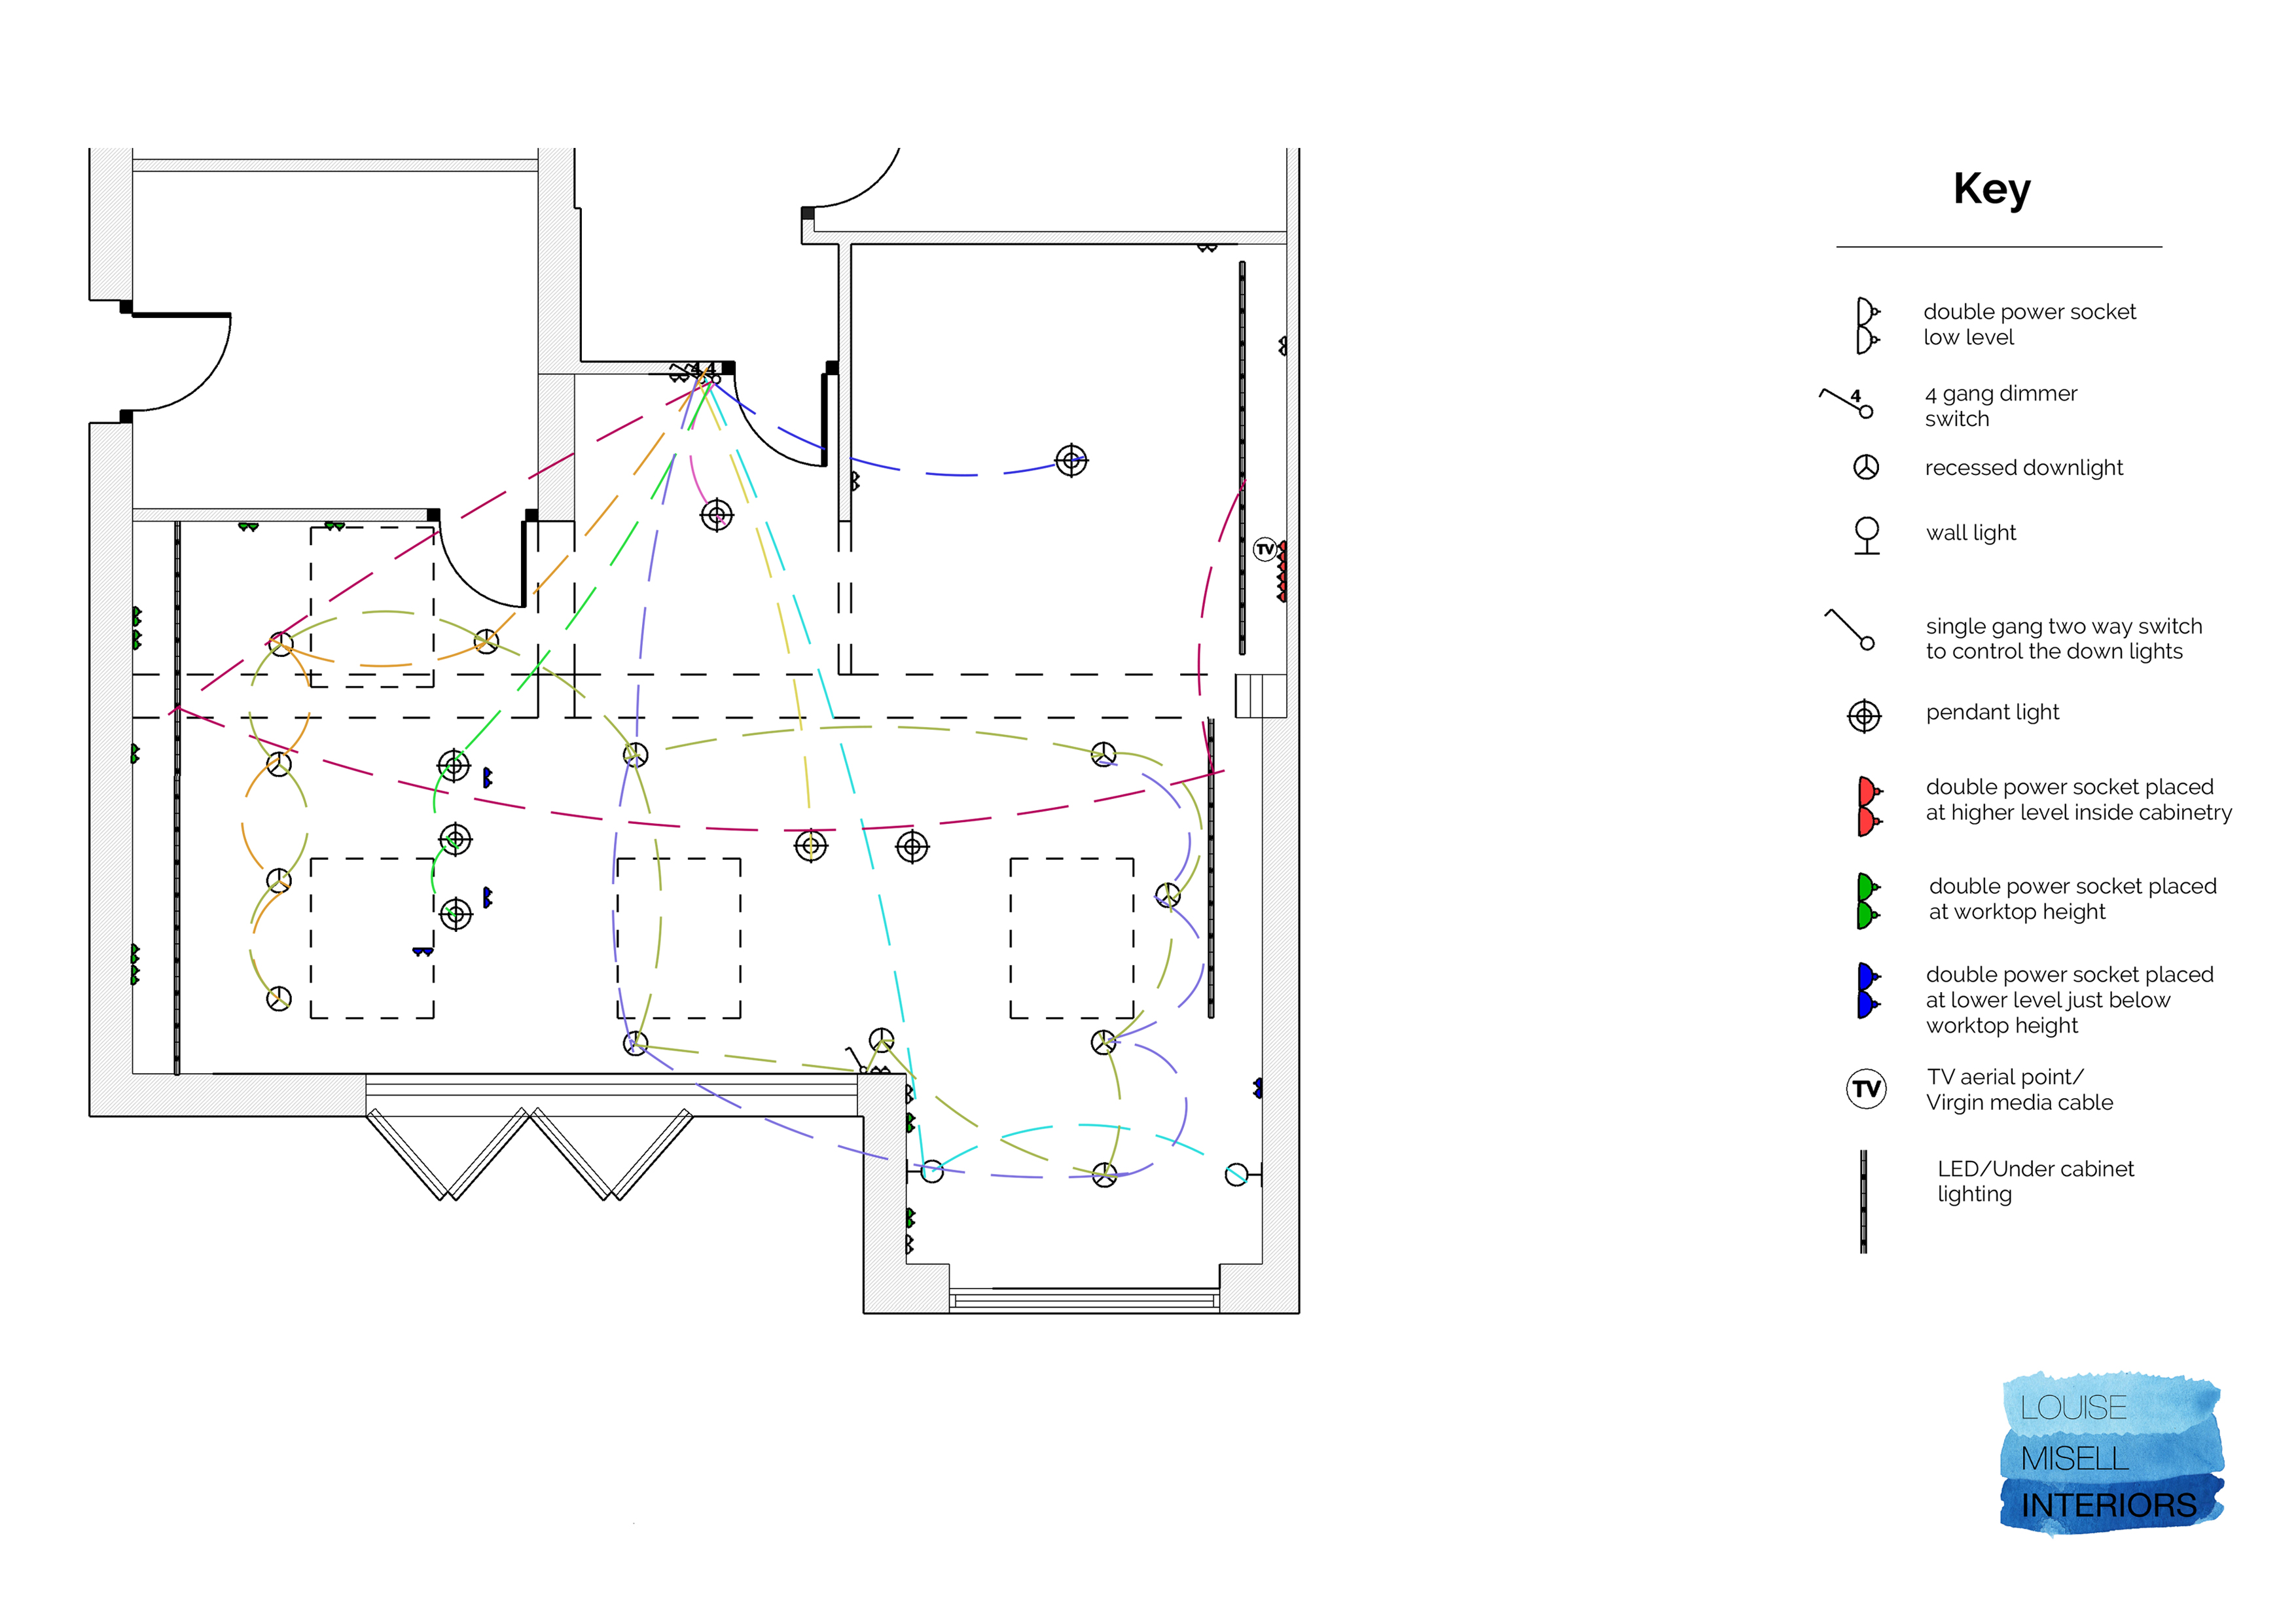 A technical drawing of an electrical plan for a room